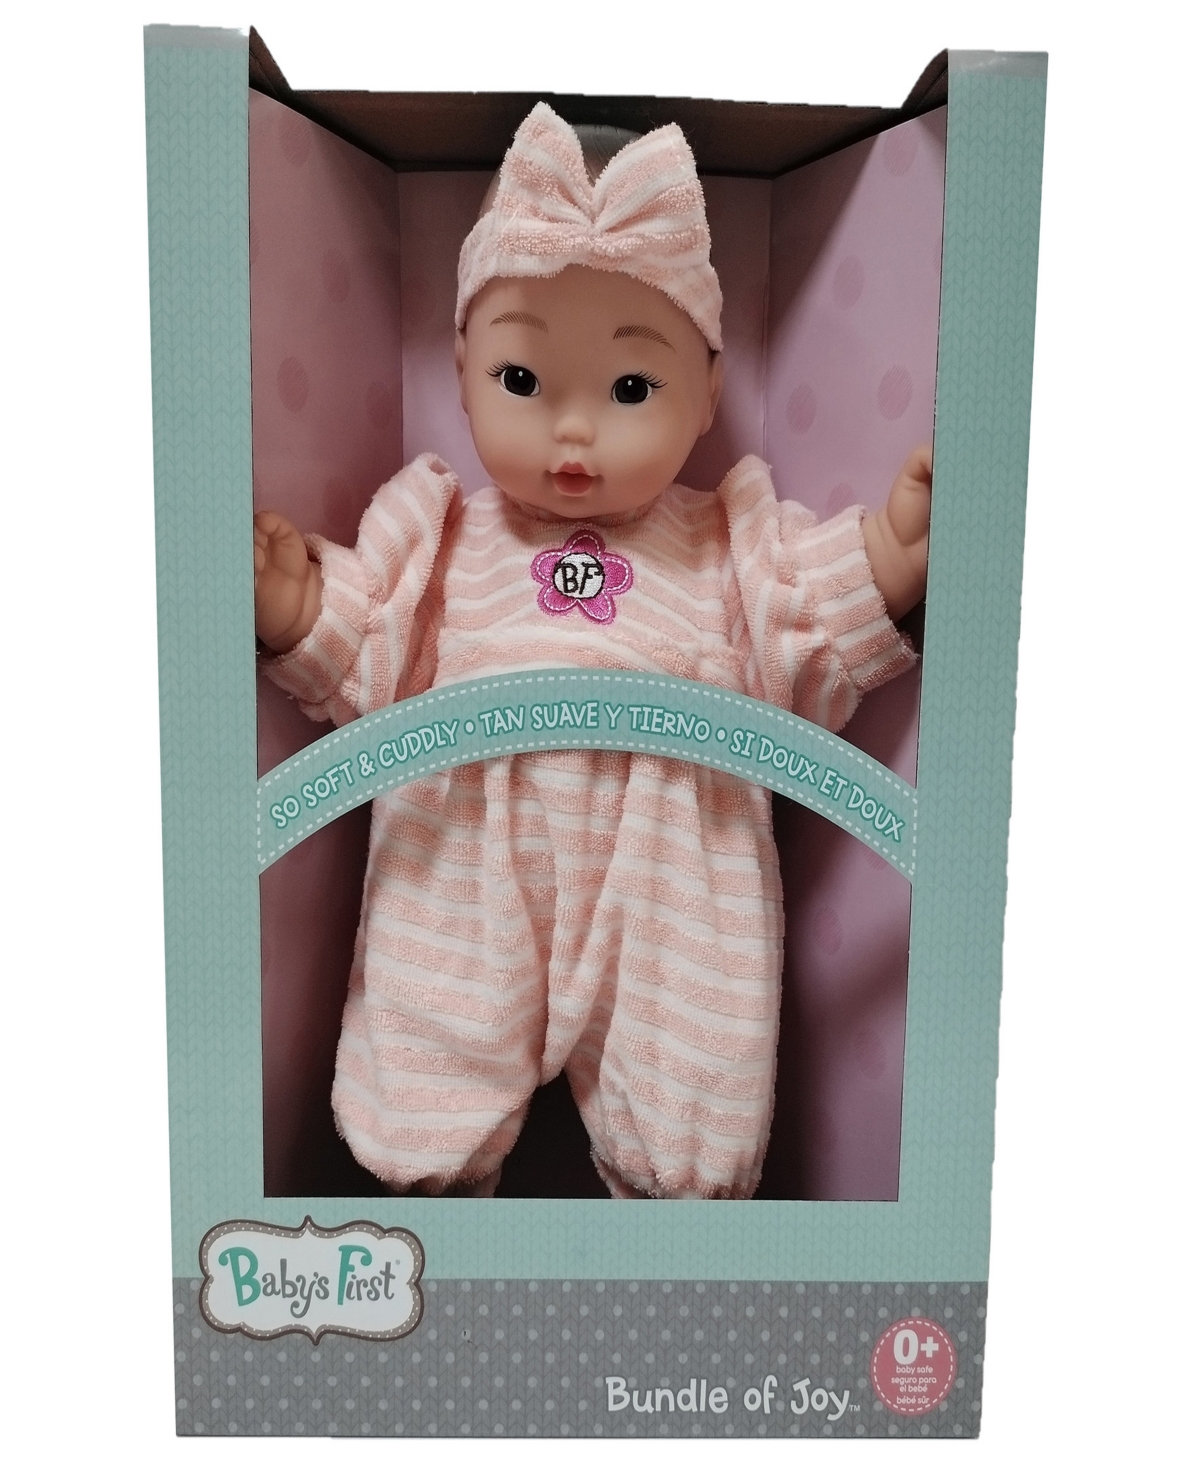 Baby's First By Nemcor Goldberger Asian Baby Doll In Multi